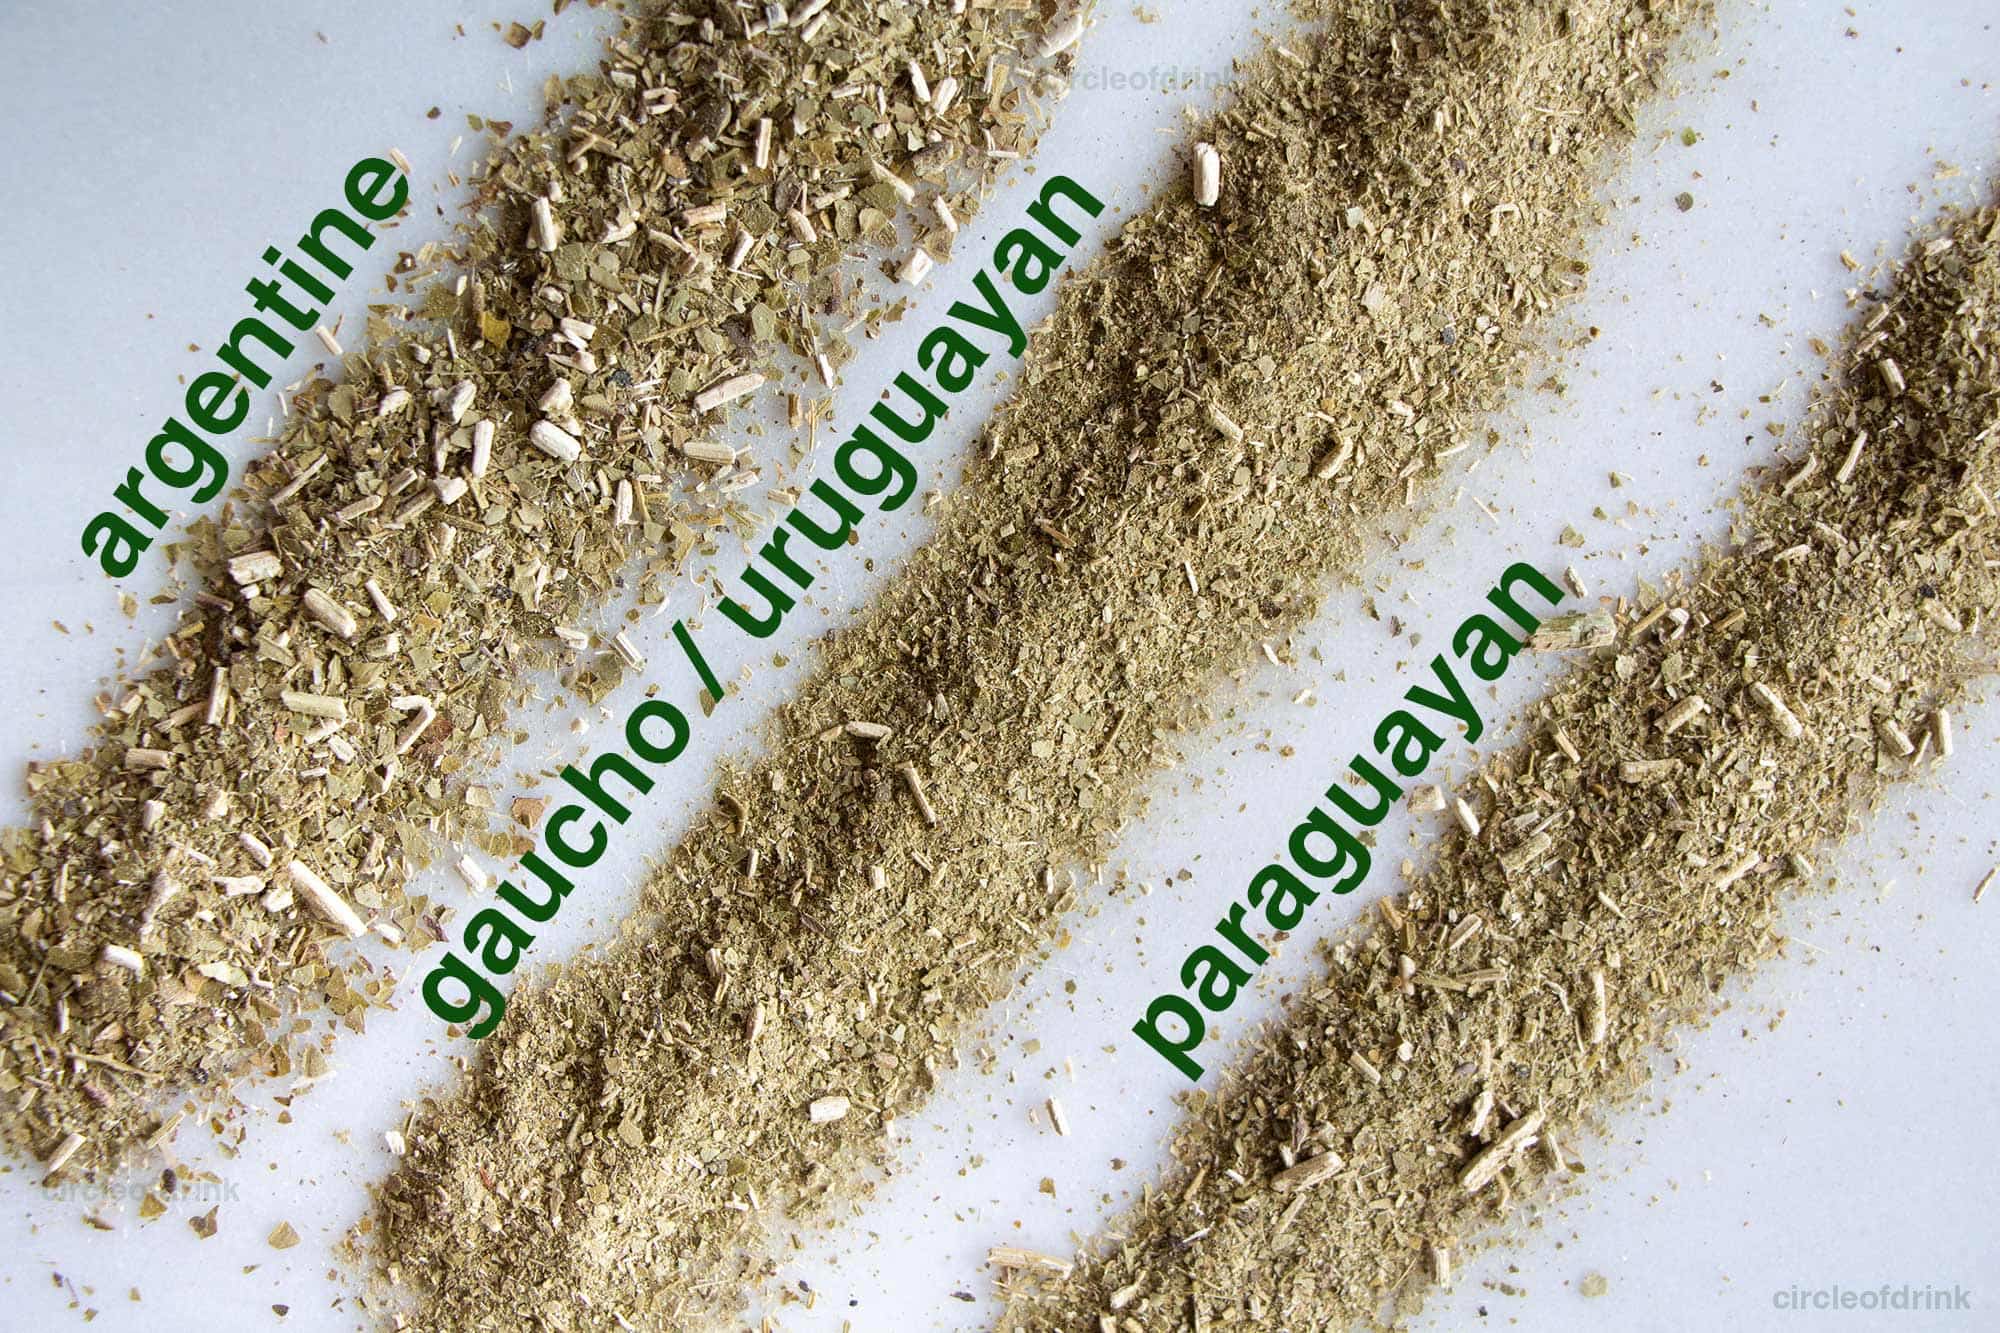 Types of Yerba Mate Tea Explained - Circle of Drink